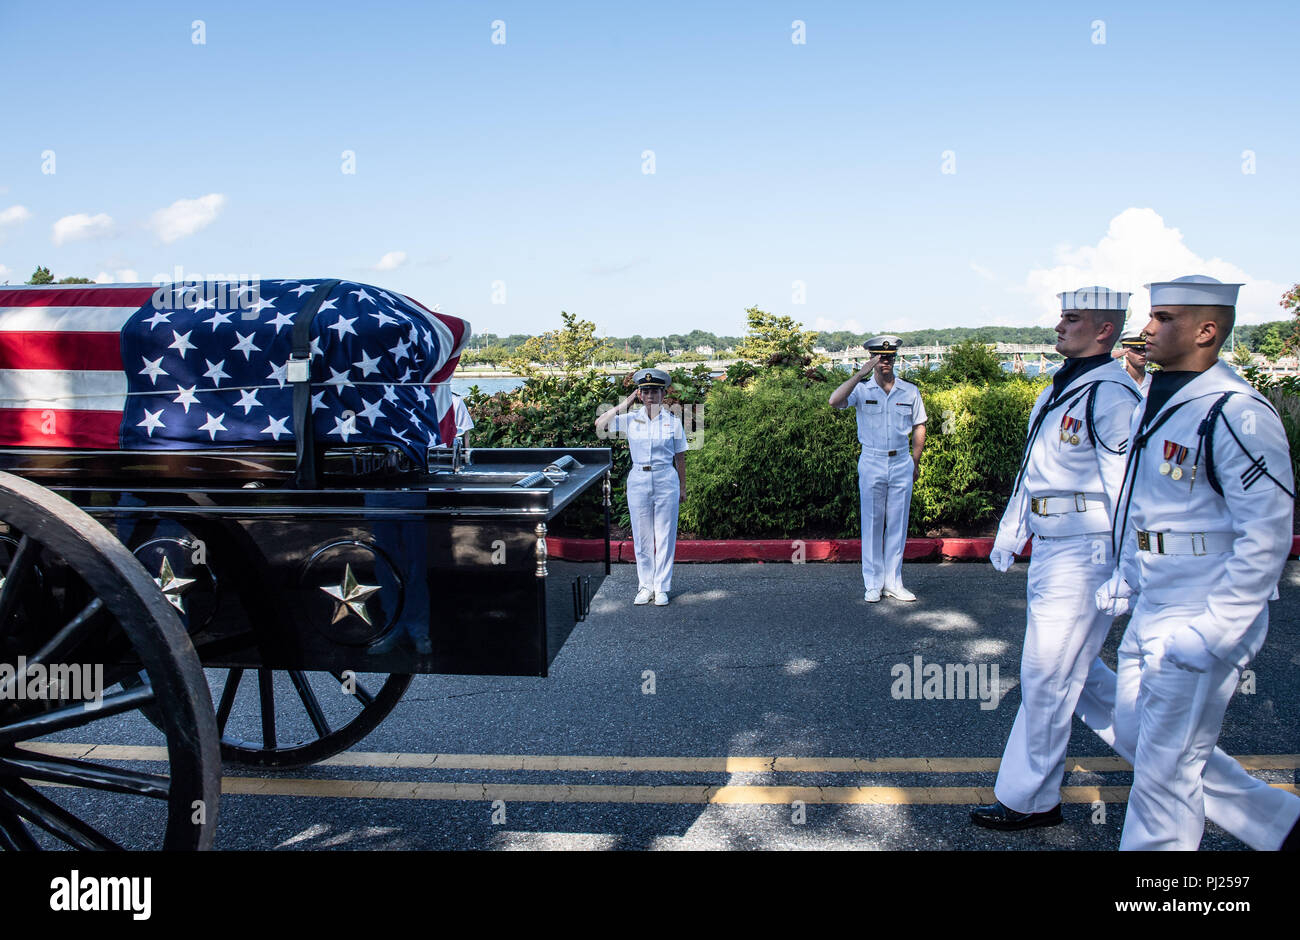 Midshipmen salute as the flag draped casket of Sen. John McCain as a horse-drawn caisson processes to the United States Naval Academy Cemetery for his burial service September 2, 2018 in Annapolis, Maryland. John S. McCain, III graduated from the United States Naval Academy in 1958. He was a pilot in the United States Navy, a prisoner of war in Vietnam, a Congressmen and Senator and twice presidential candidate. He received numerous awards, including the Silver Star, Legion of Merit, Purple Heart, and Distinguished Flying Cross. Stock Photo